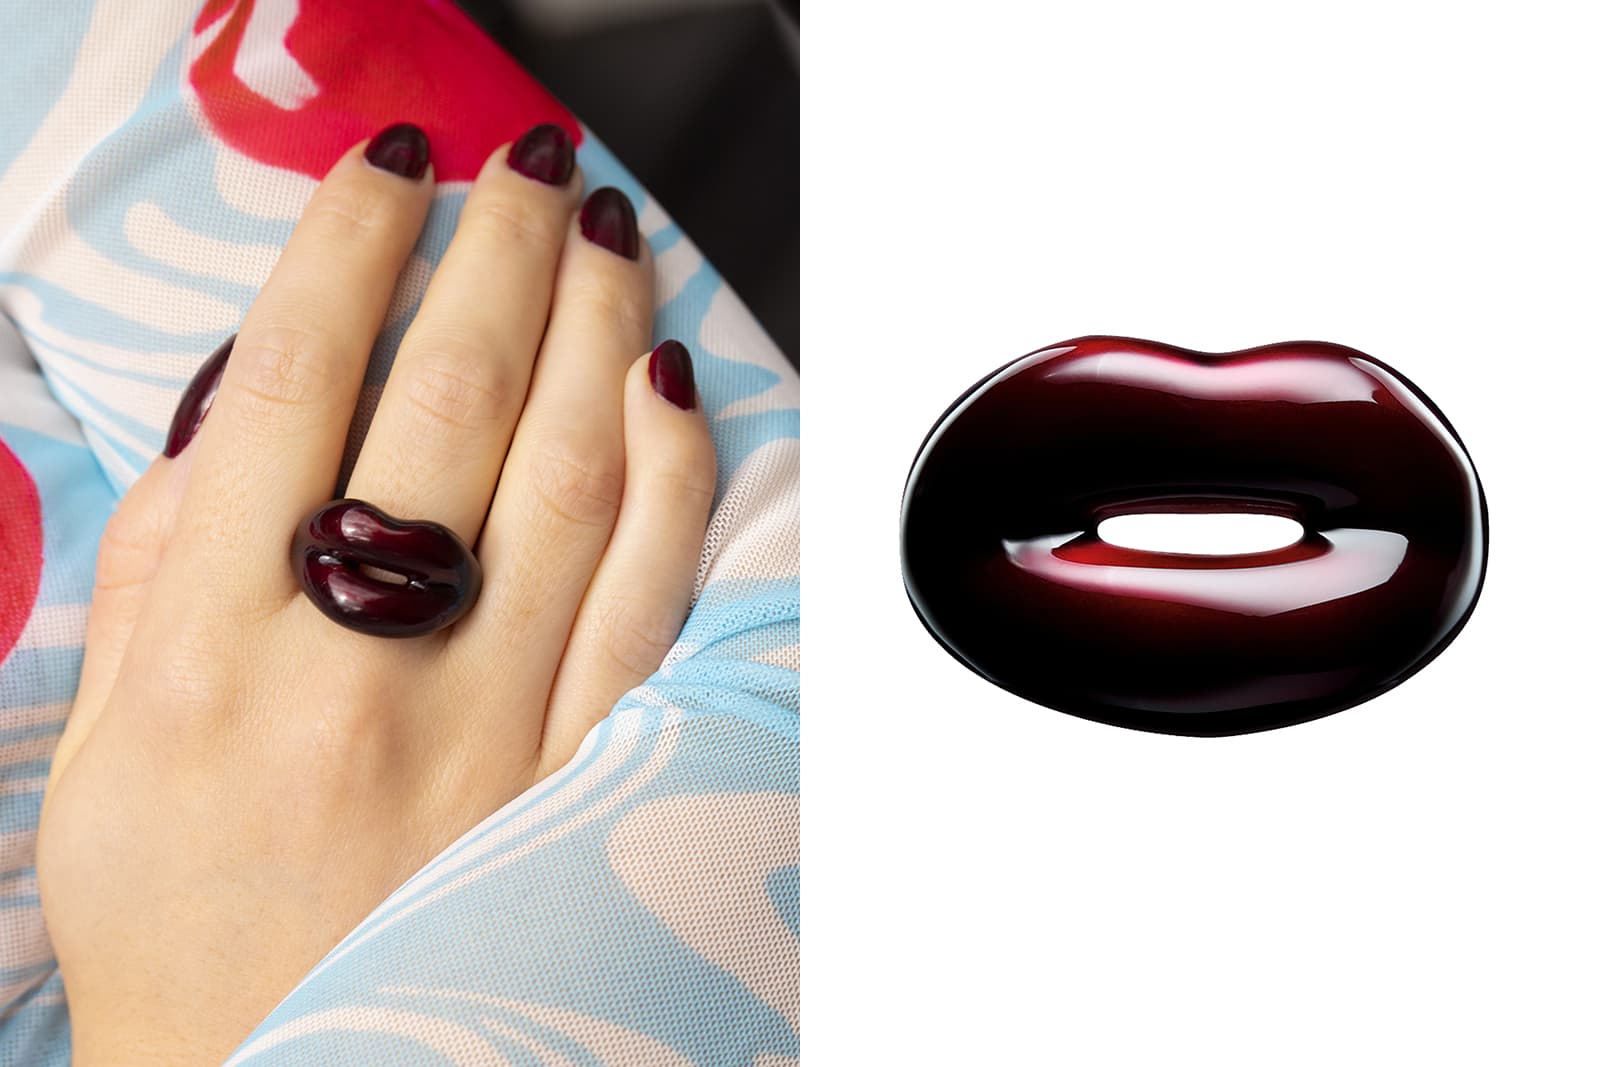 Black Cherry Hotlips ring created in hand painted enamel and 100% recycled sterling silver by Solange Azagury-Partridge